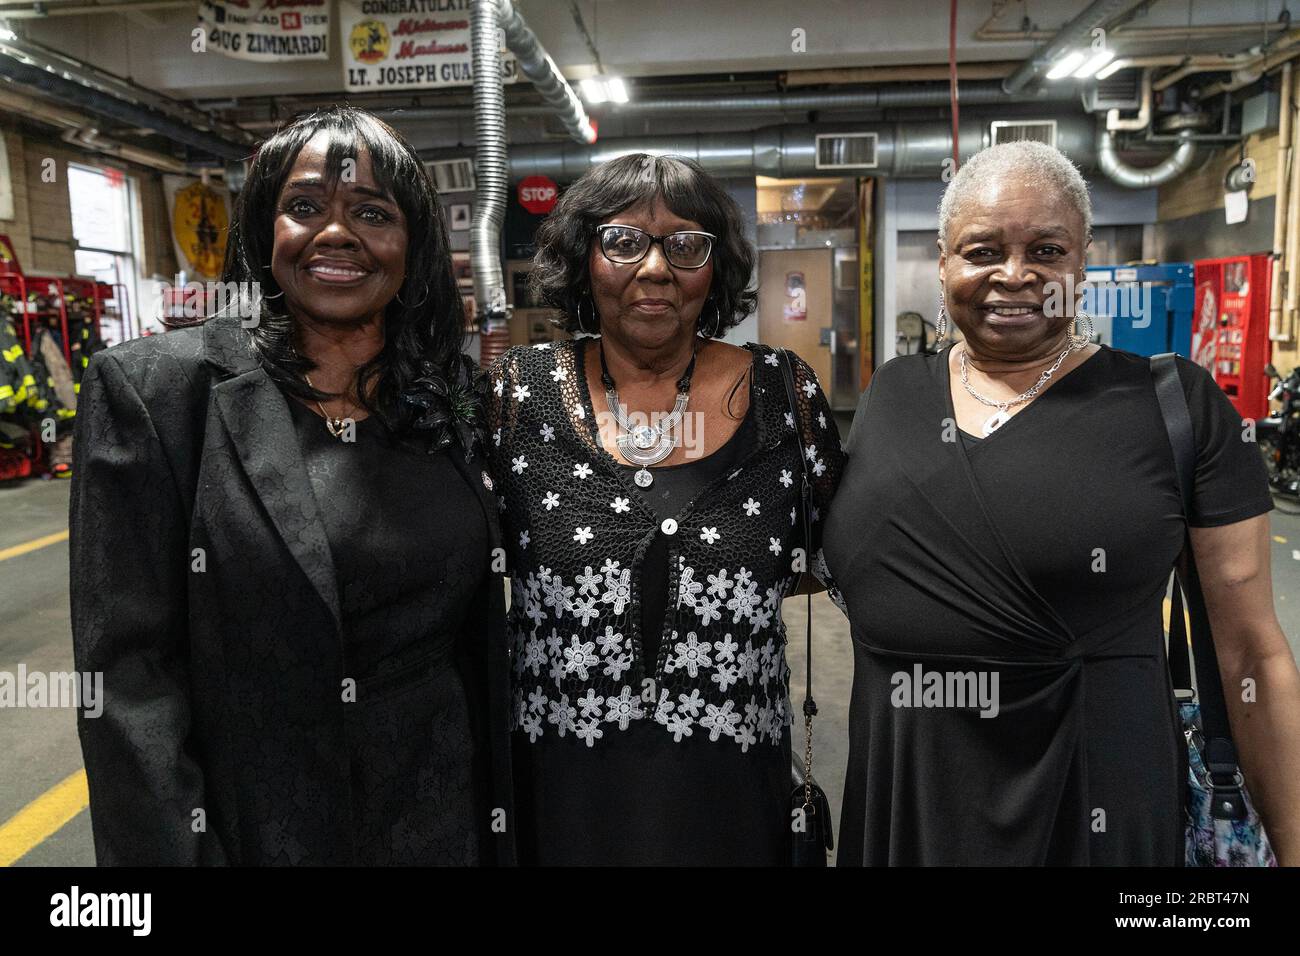 New York, USA. 10th July, 2023. Gwendolyn Webb, Gwendolyn Gamble, Gloria Washington attend a press conference on anniversary of Children's Crusade or Children's March as it is known at FDNY Engine 1, Ladder 24 station in New York. March was held in Birmingham, Alabama on 2 - 10 May, 1963 and was attended by more than 5,000 school children, 3 of them joined this press conference: Gloria Washington, Gwendolyn Gamble, Gwyndolyn Webb. Members of FDNY at the time stood up against the City of Birmingham fire department using force against children. (Photo by Lev Radin/Pacific Press) Credit: Pacific  Stock Photo